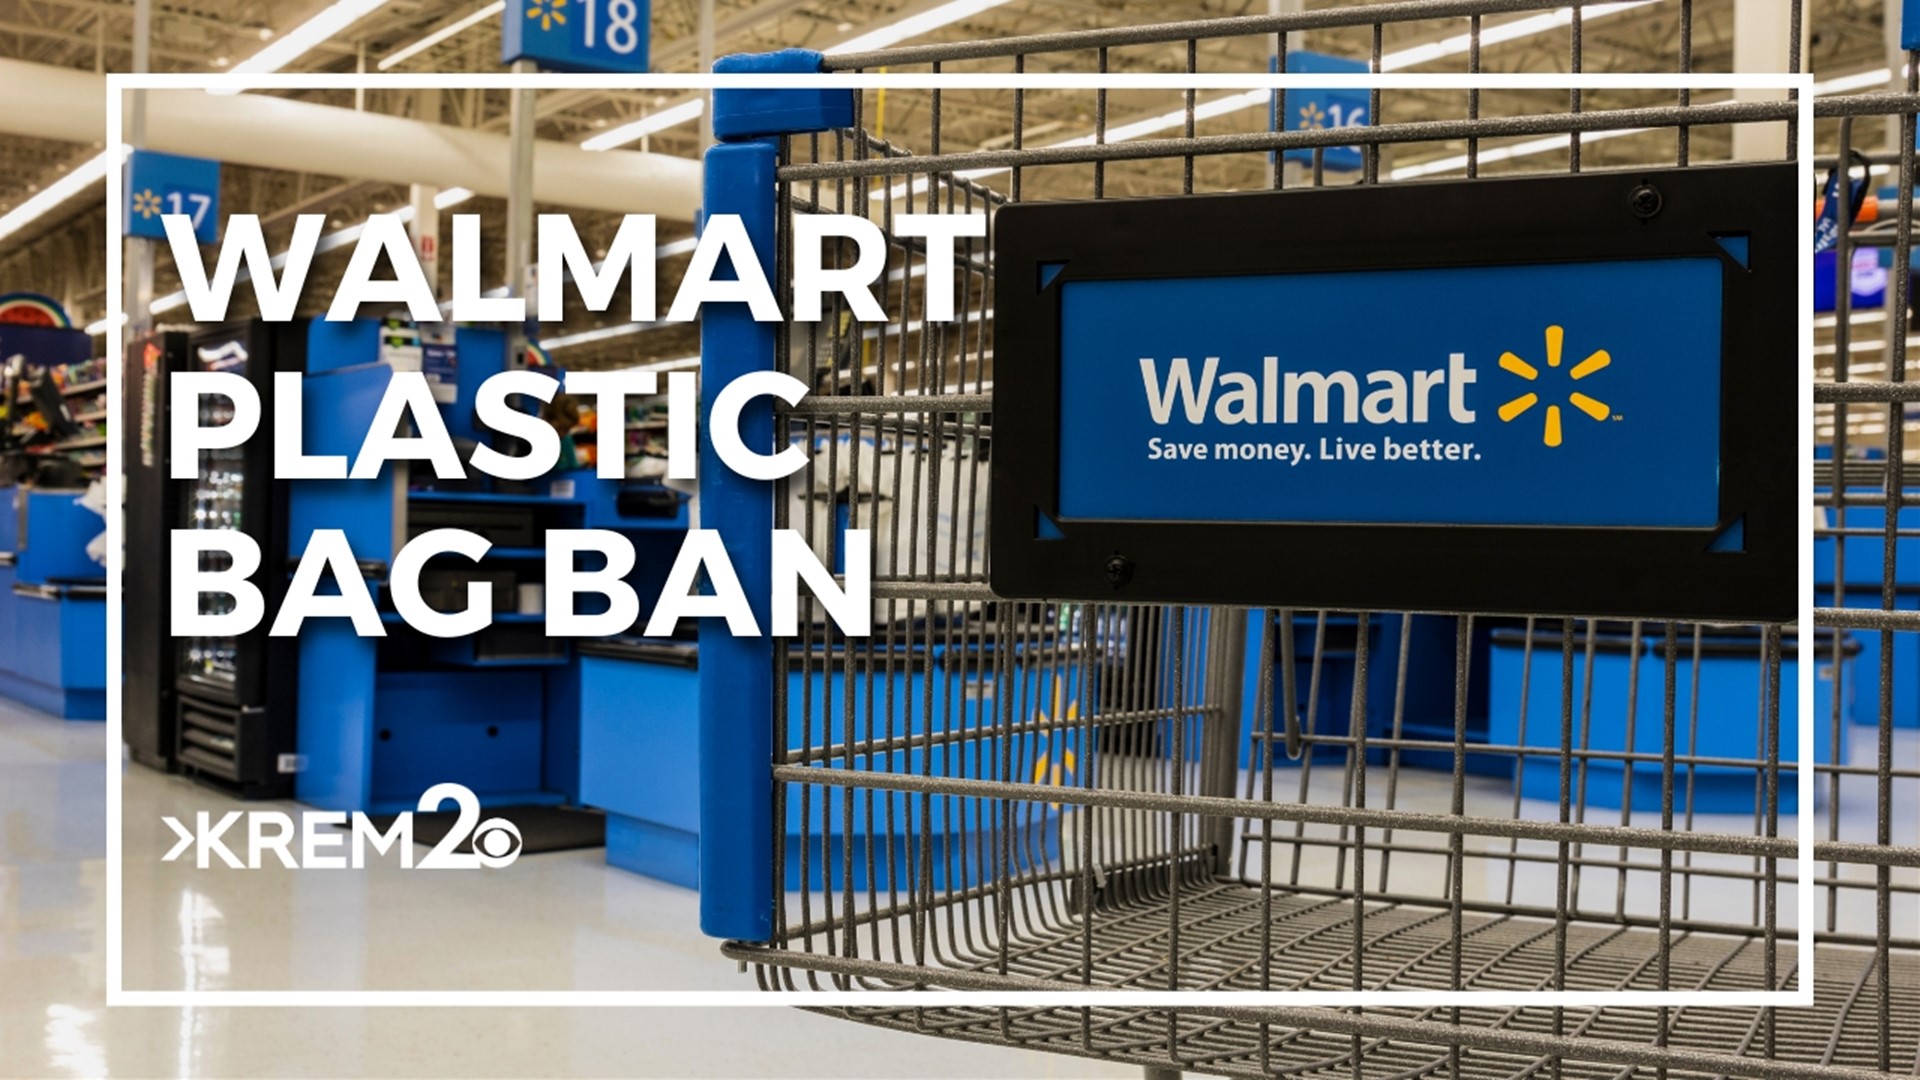 Even though Walmart has been warning its shopper for the past month, some shoppers were still caught off guard.